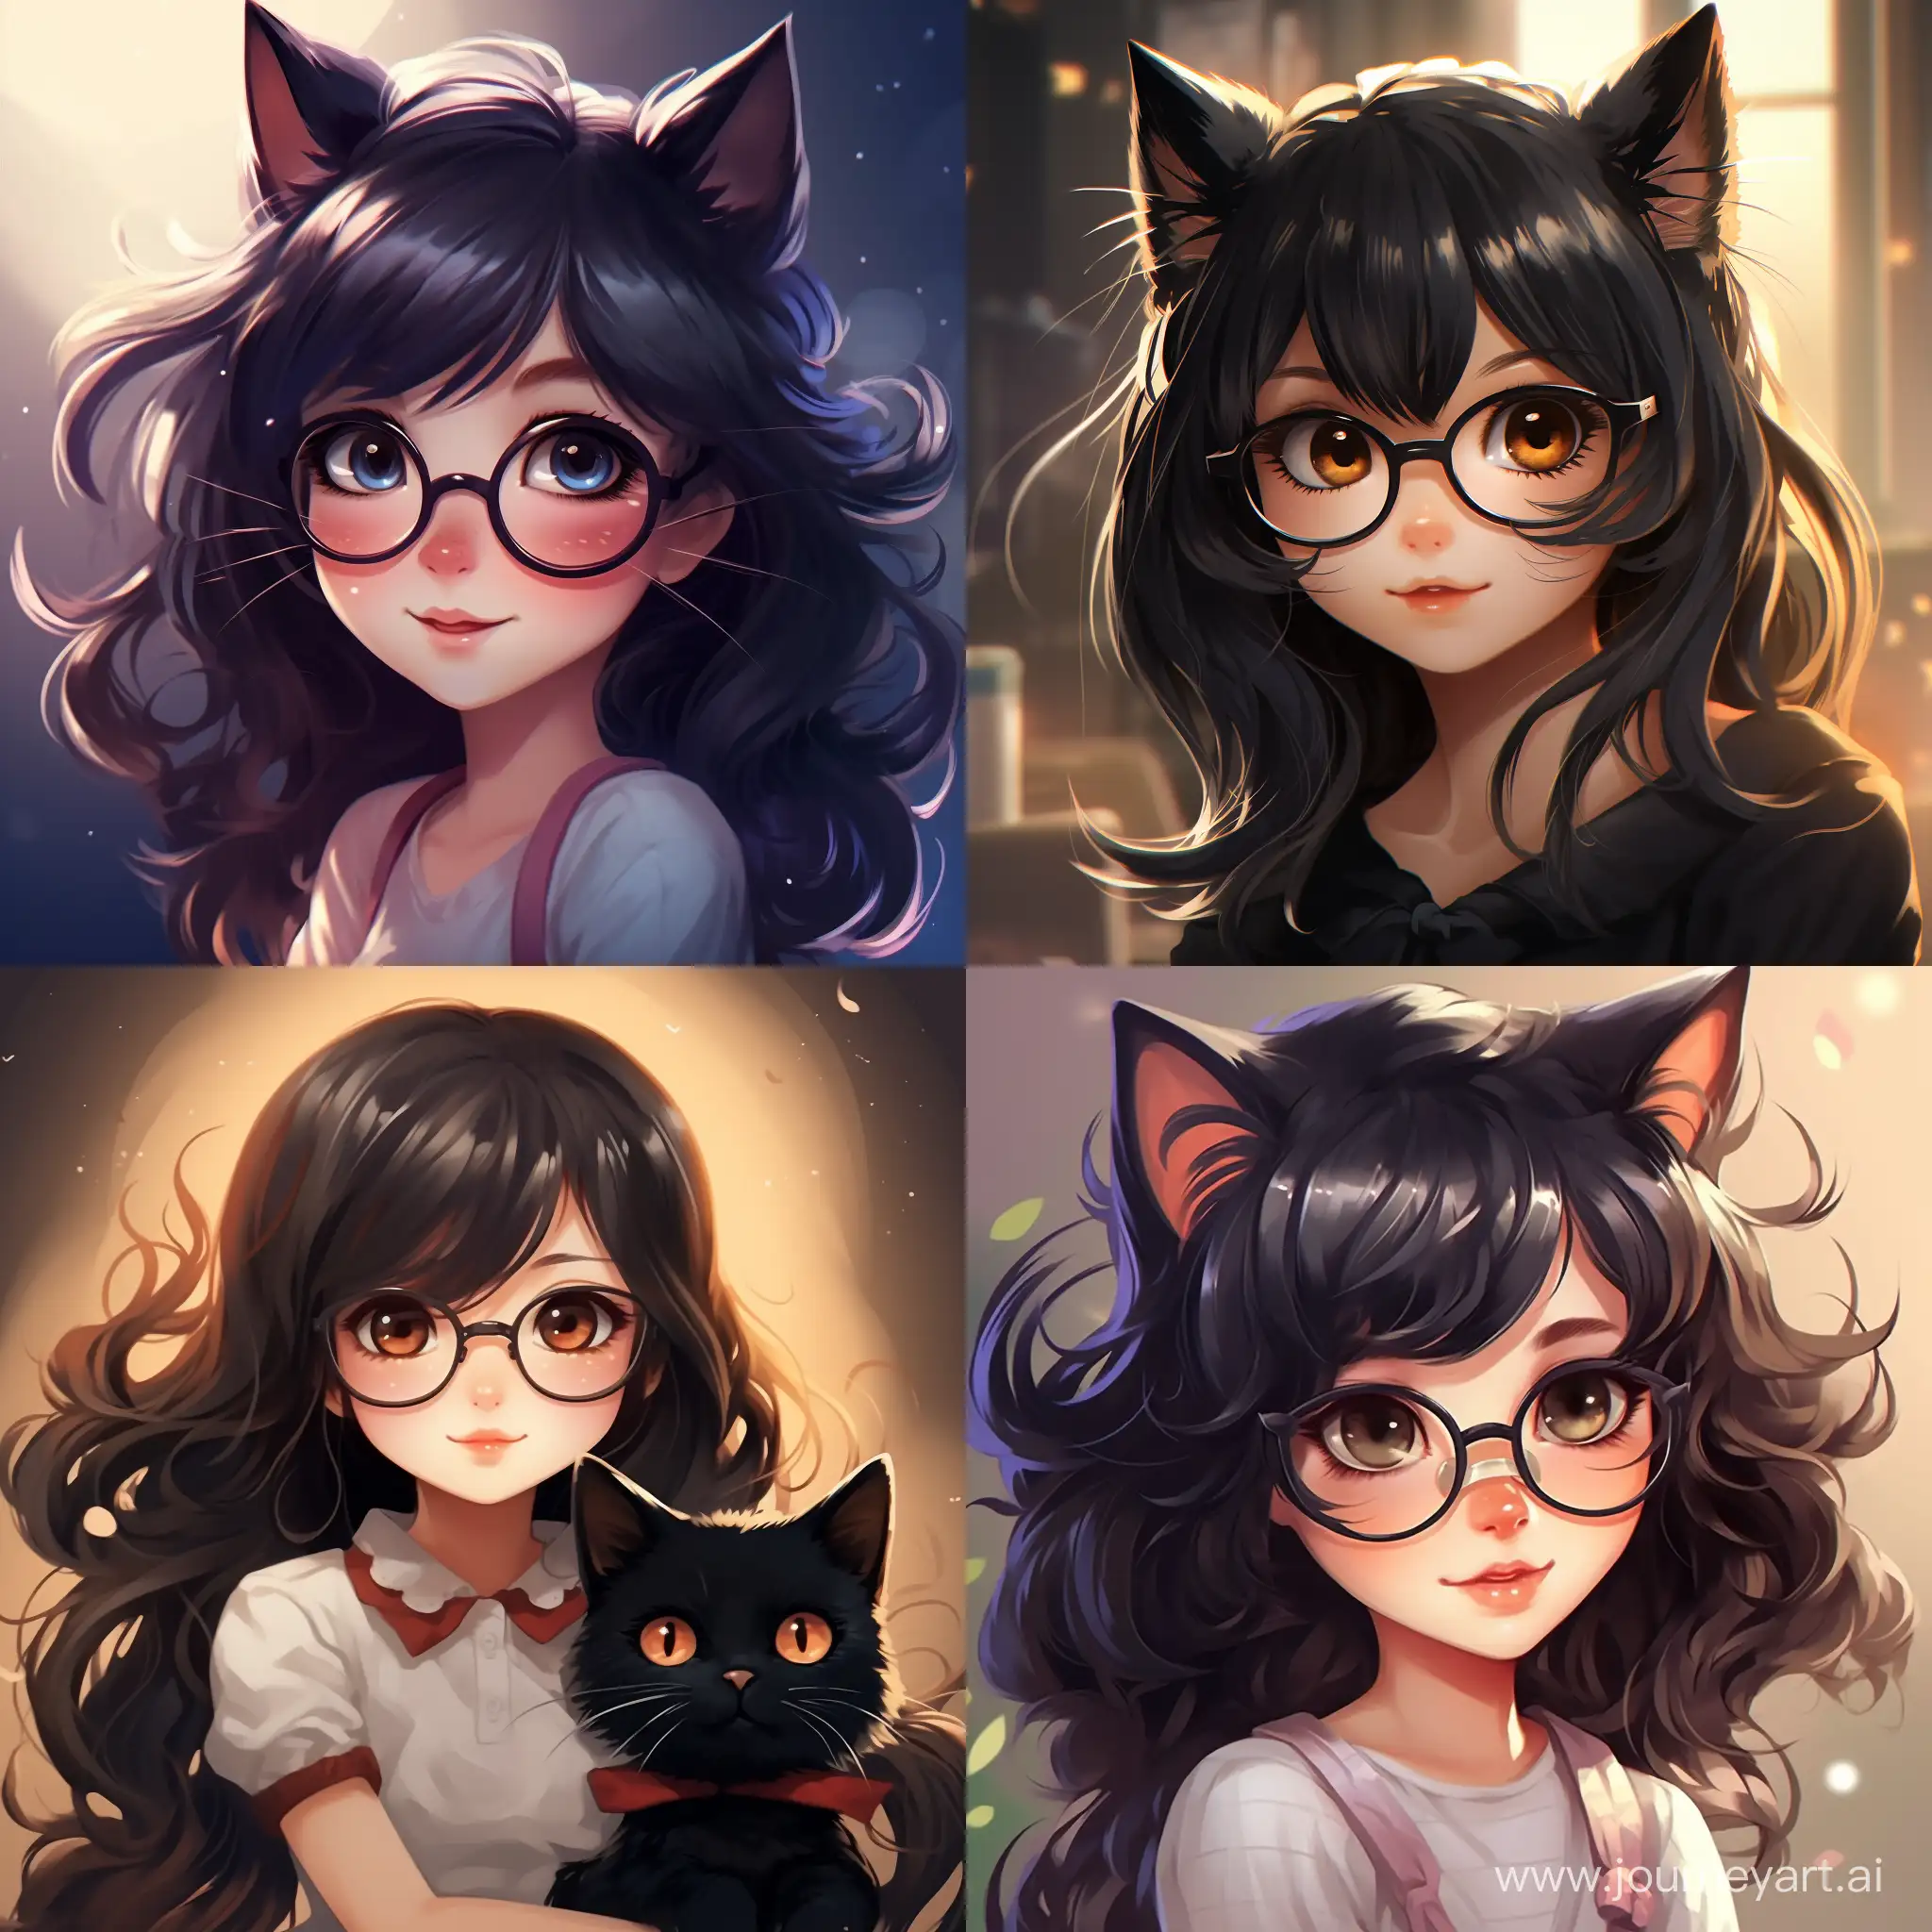 Adorable-Anime-Cat-Girl-with-Glasses-and-Black-Hair